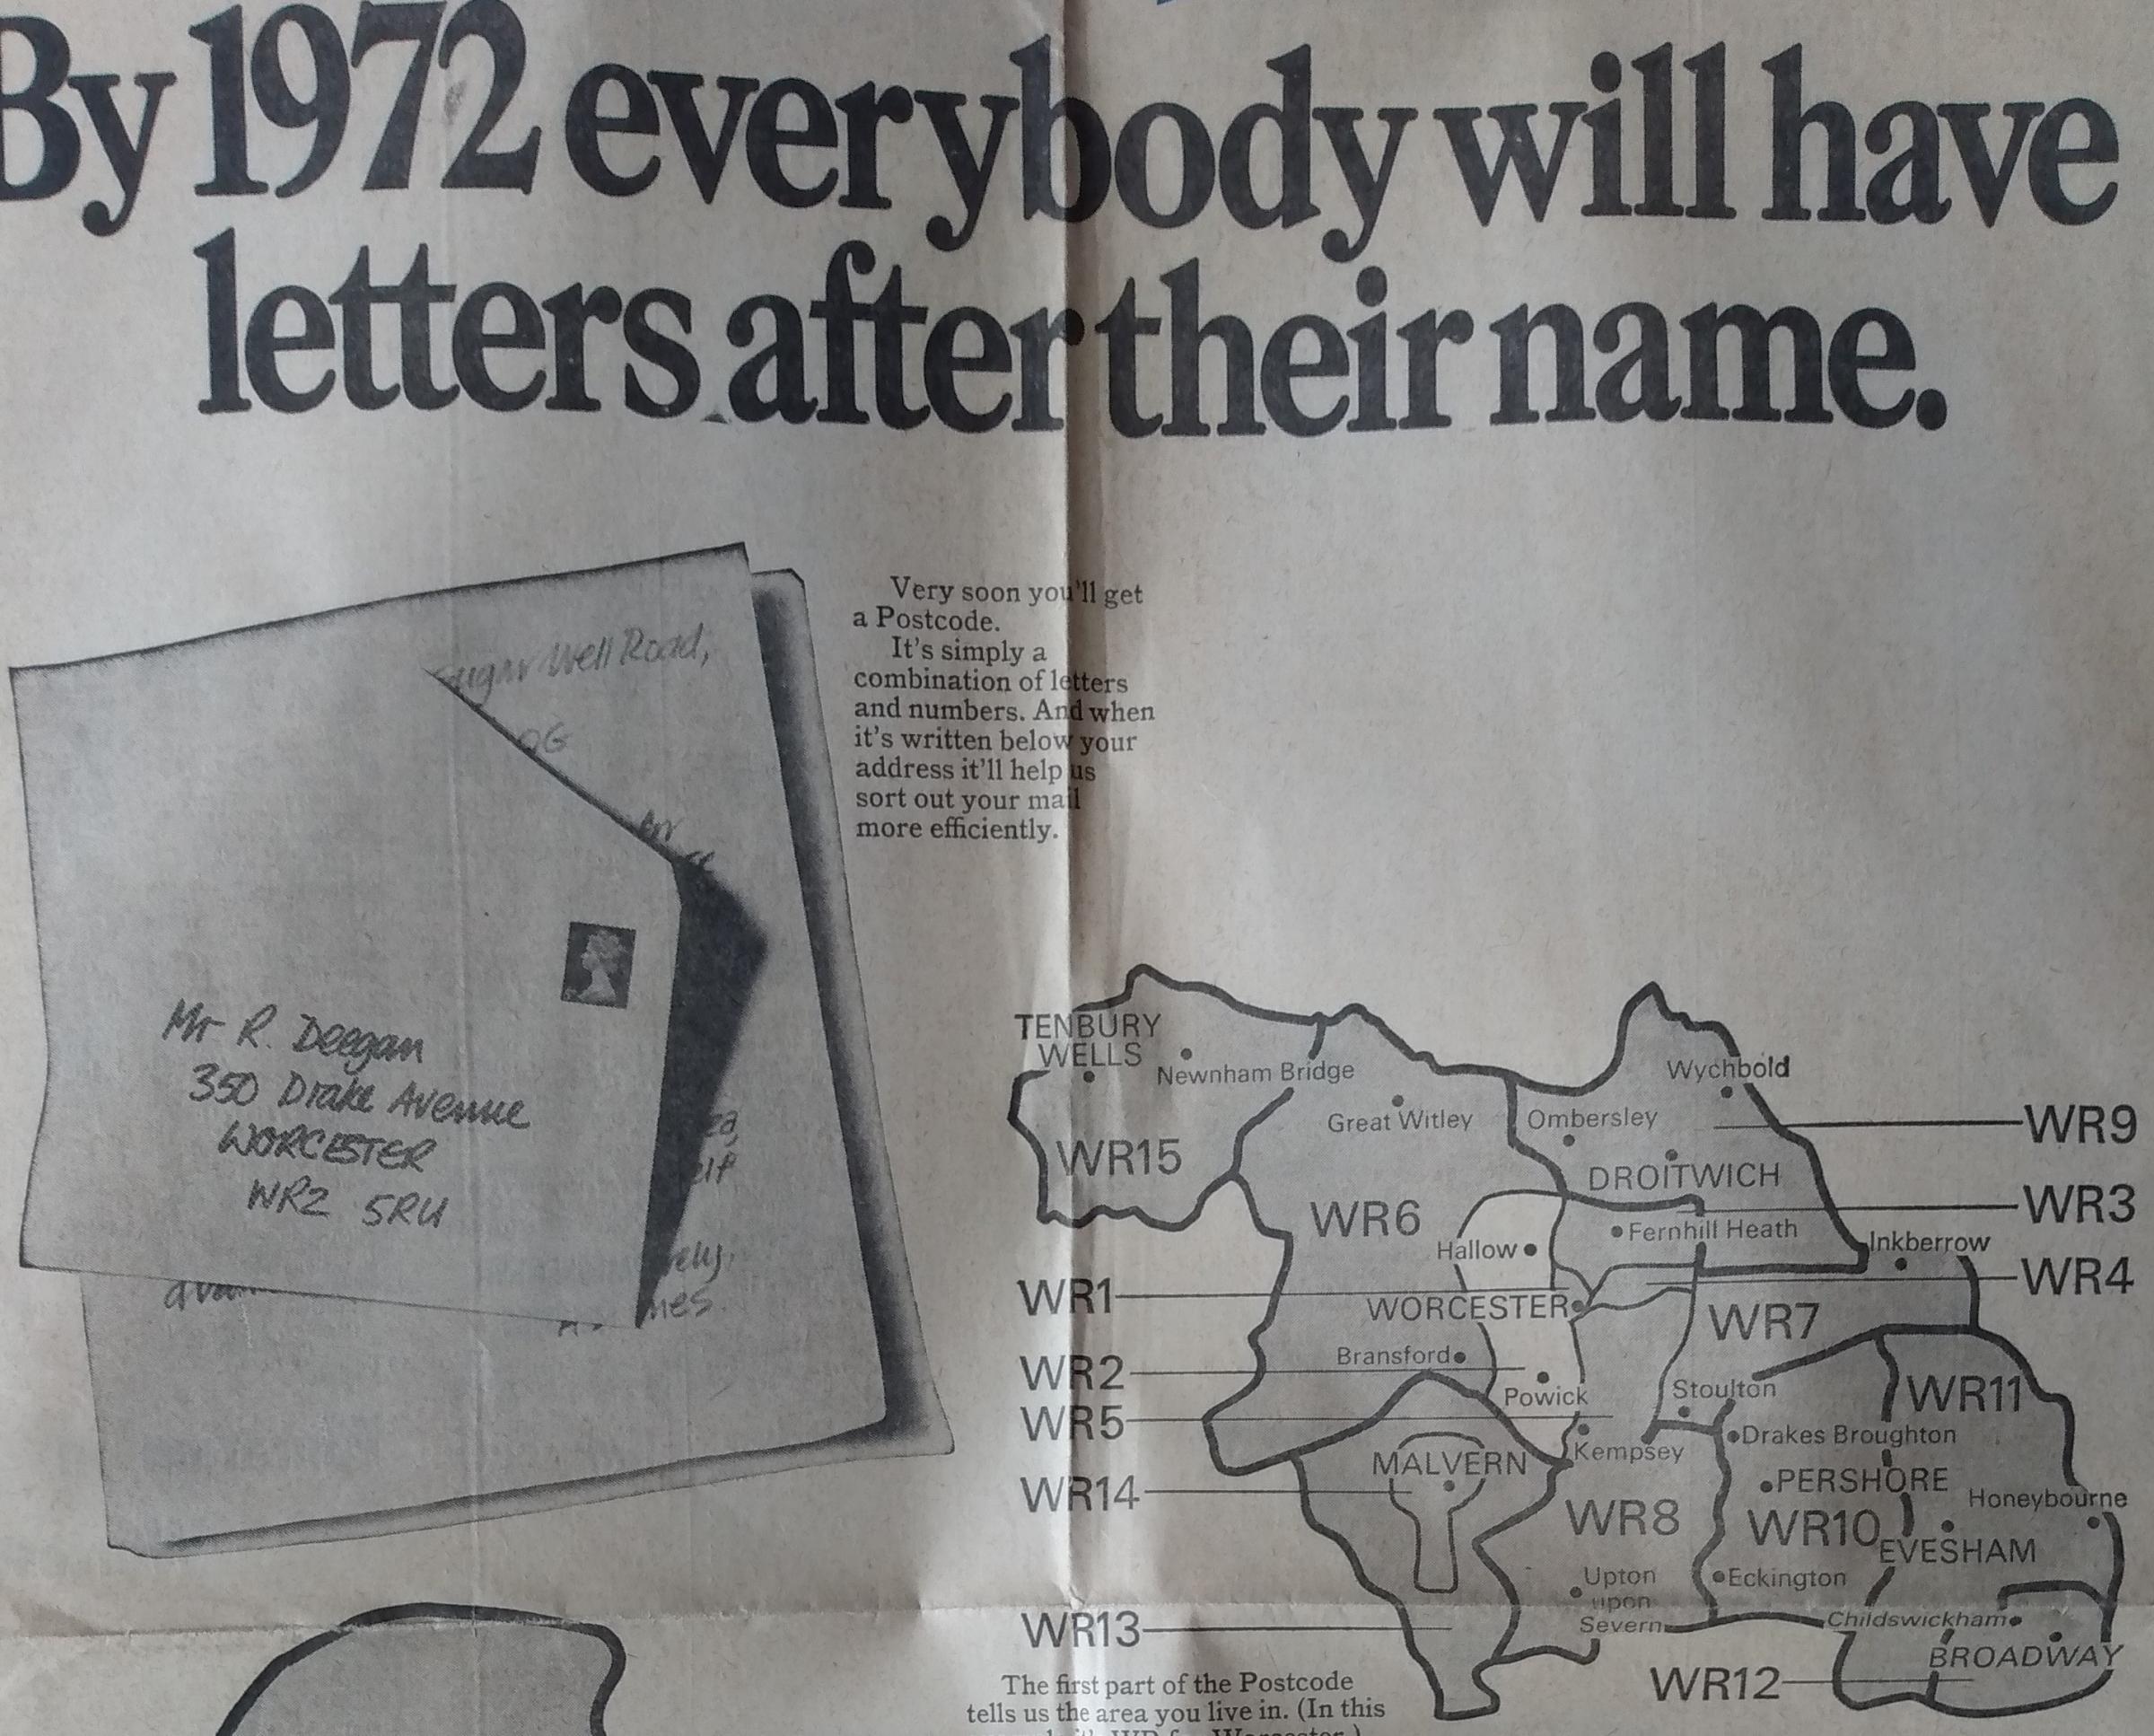 It’s hard to believe because it feels like they’ve been around forever, but postcodes only came into use in 1970. The Post Office took out full-page adverts explaining how the new system would work